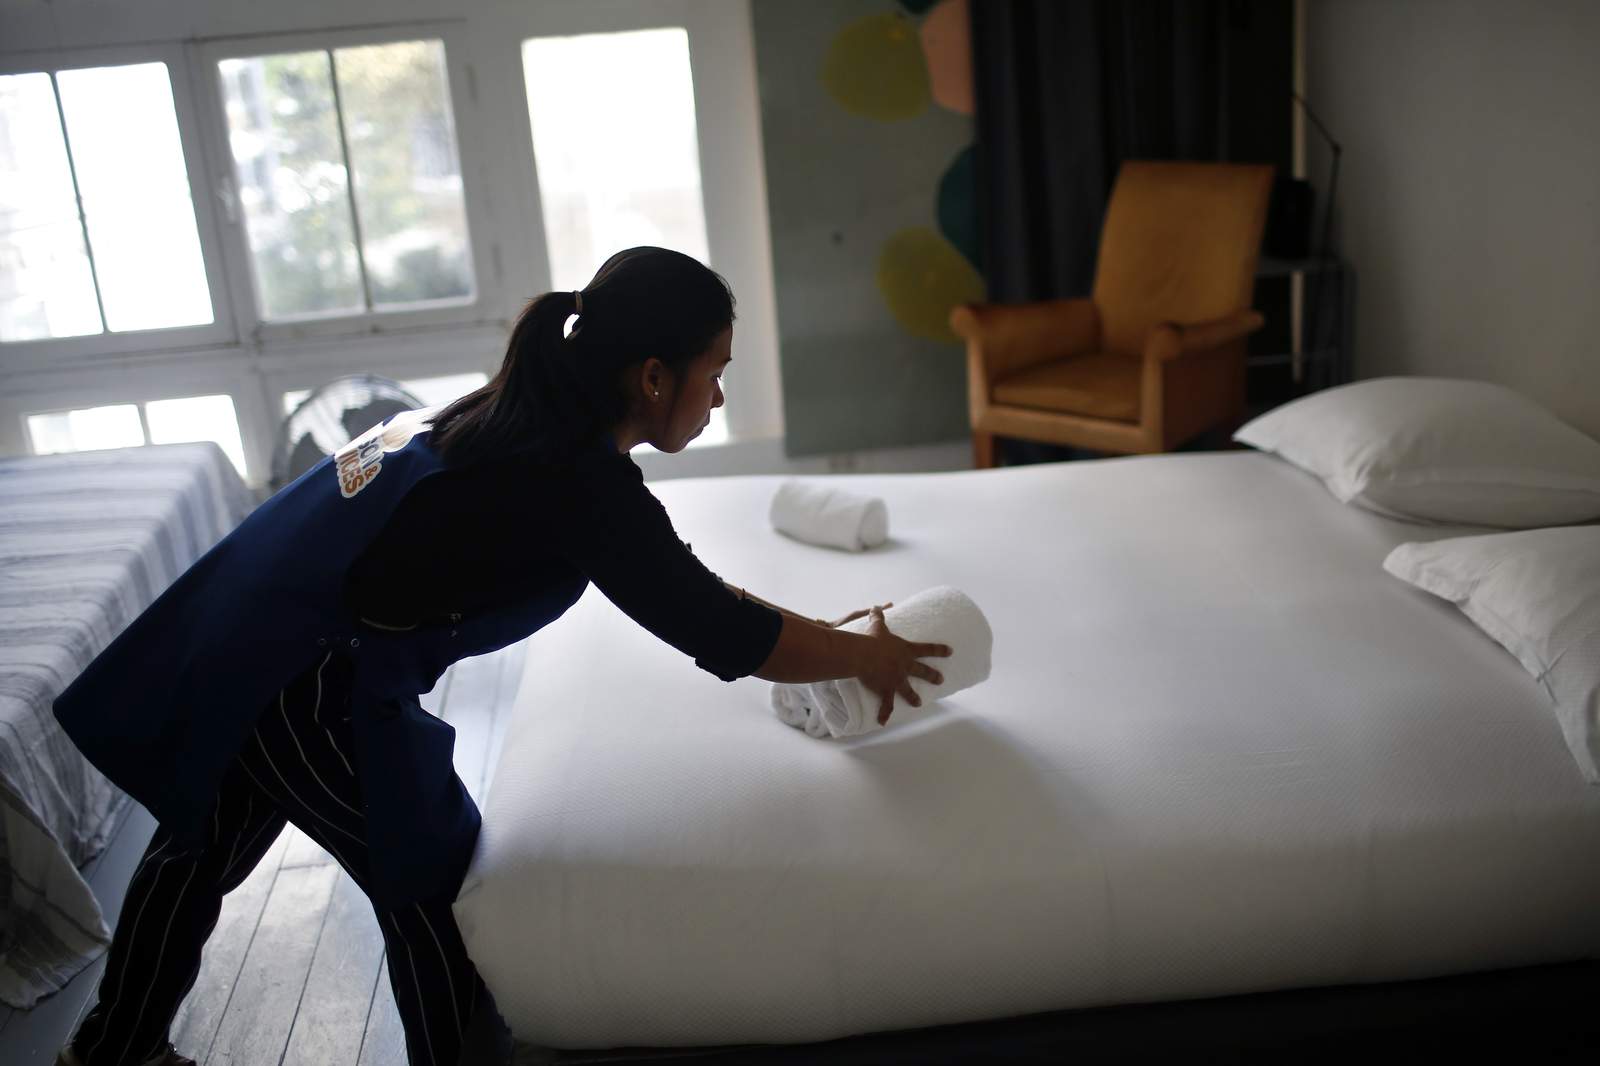 Airbnb requires hosts to commit to enhanced cleaning